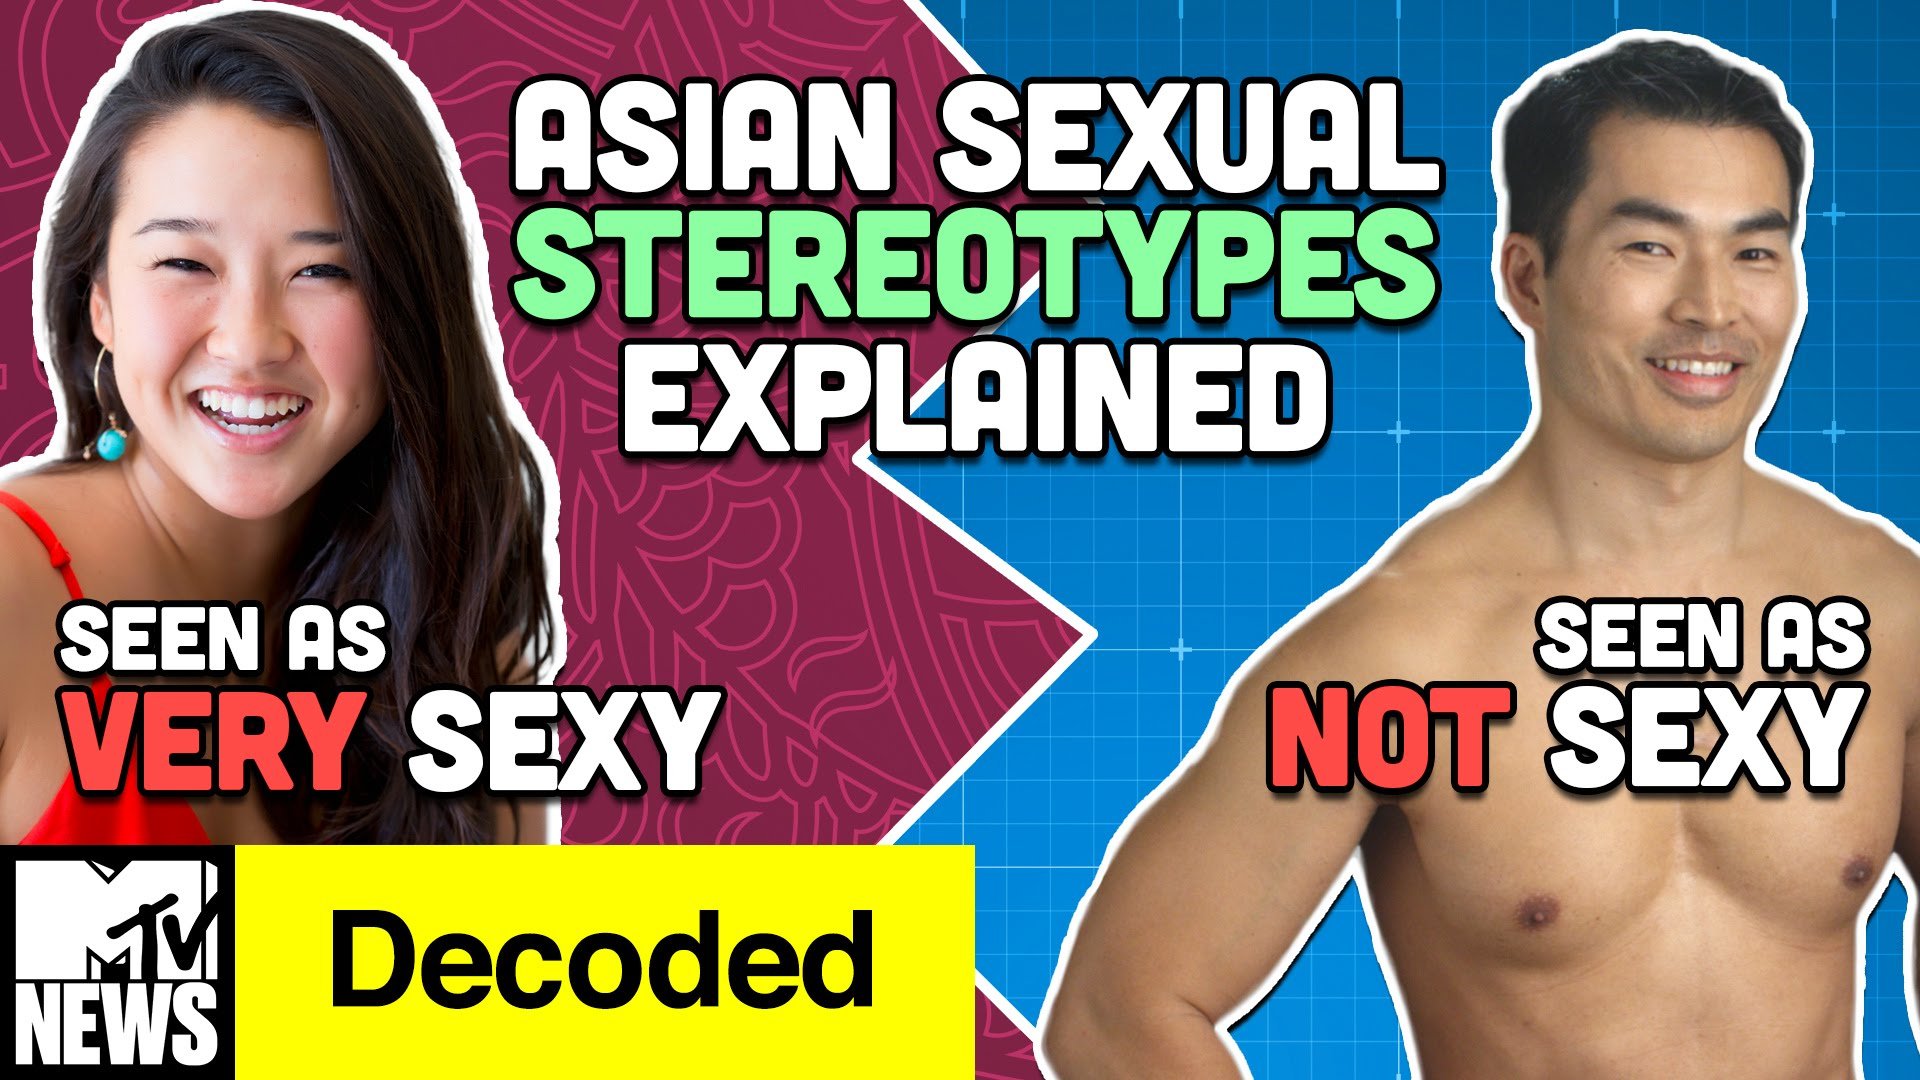 Asian Stereotypes Porn - The Weird History of East Asian Sex Stereotypes - Everyday Feminism